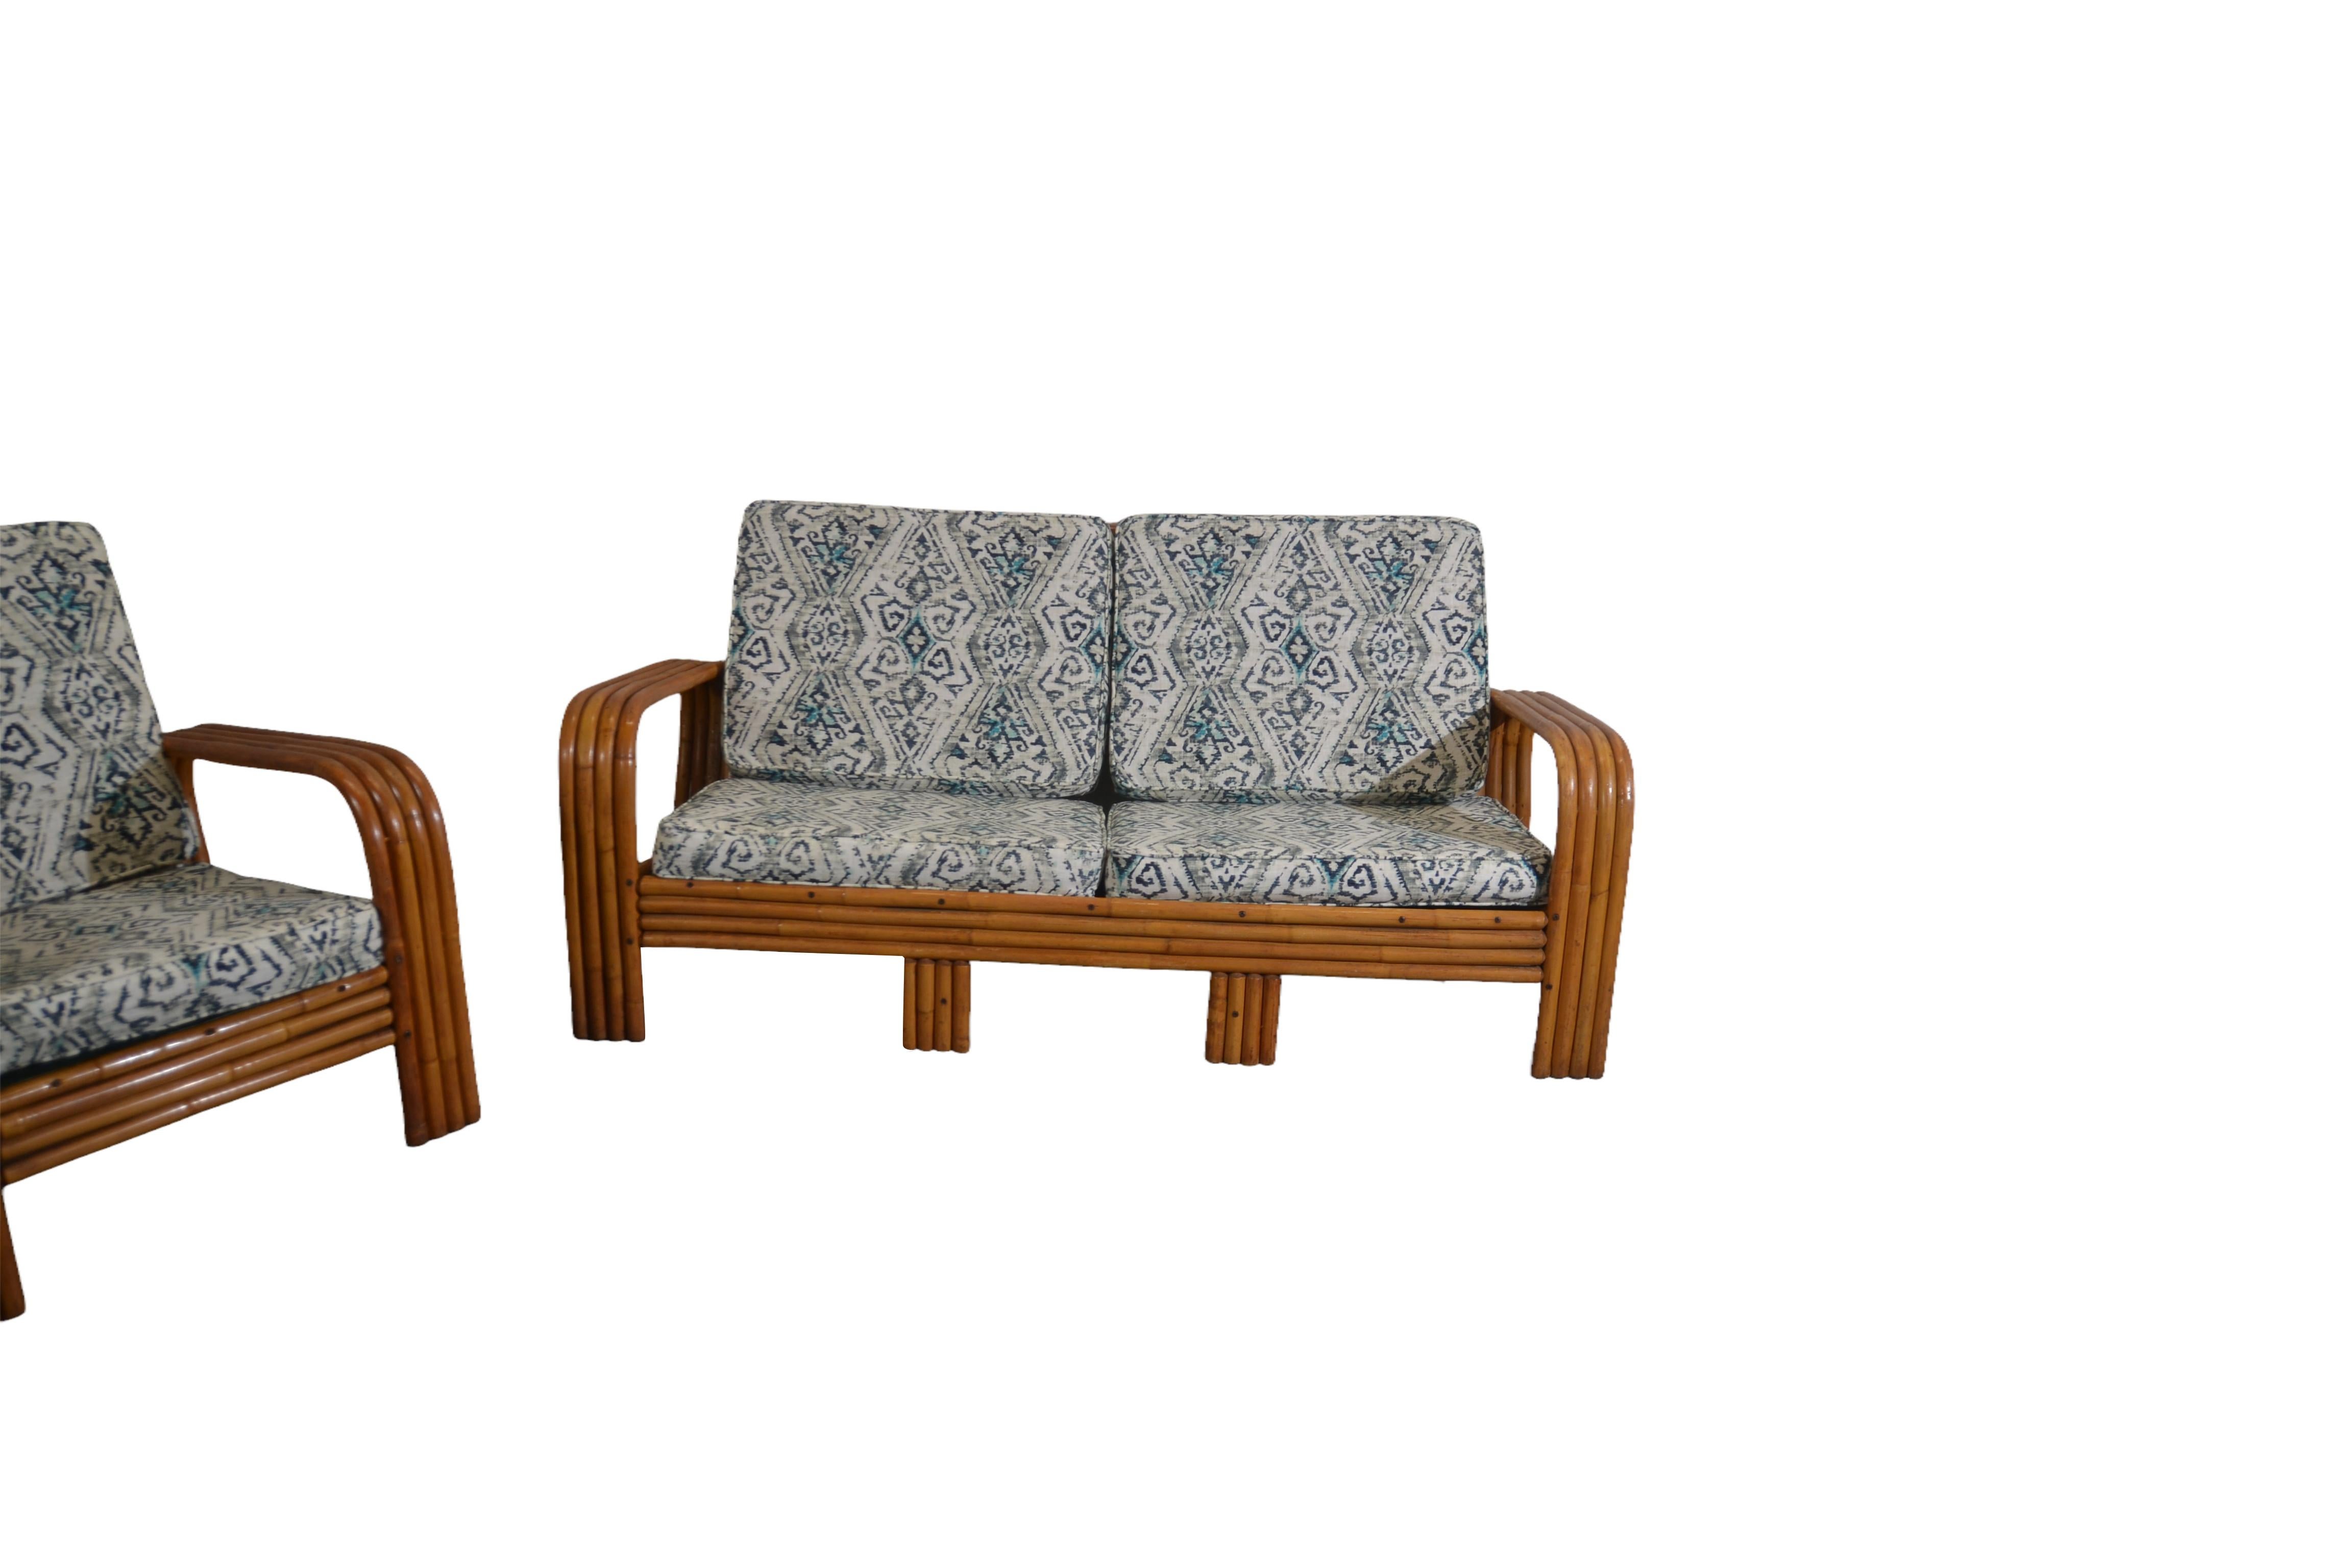 Mid-century bamboo loveseat and lounge chair. 
The cushions have been recovered.
Lounge Chair Dimensions: 31